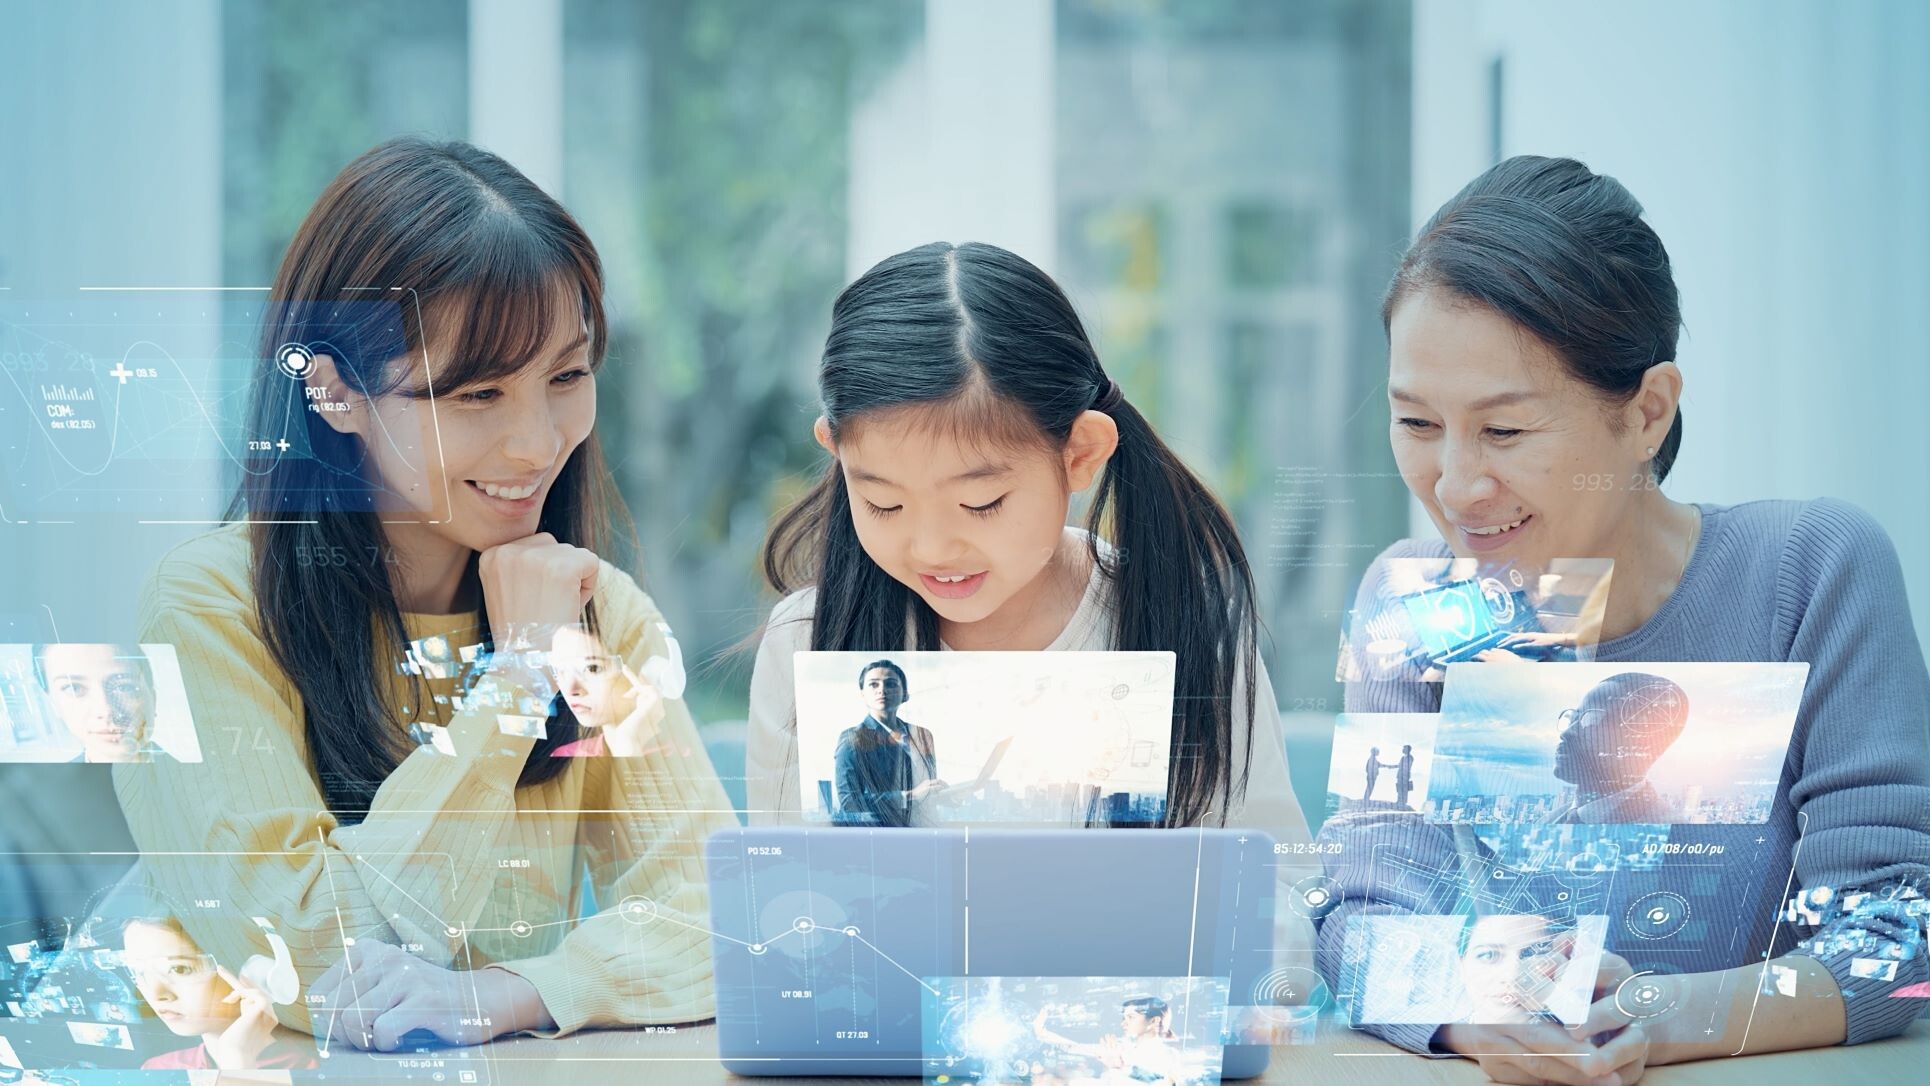 Check out 5 EdTech Trends shaping Asia's Education in 2023 at Bett Asia 2022